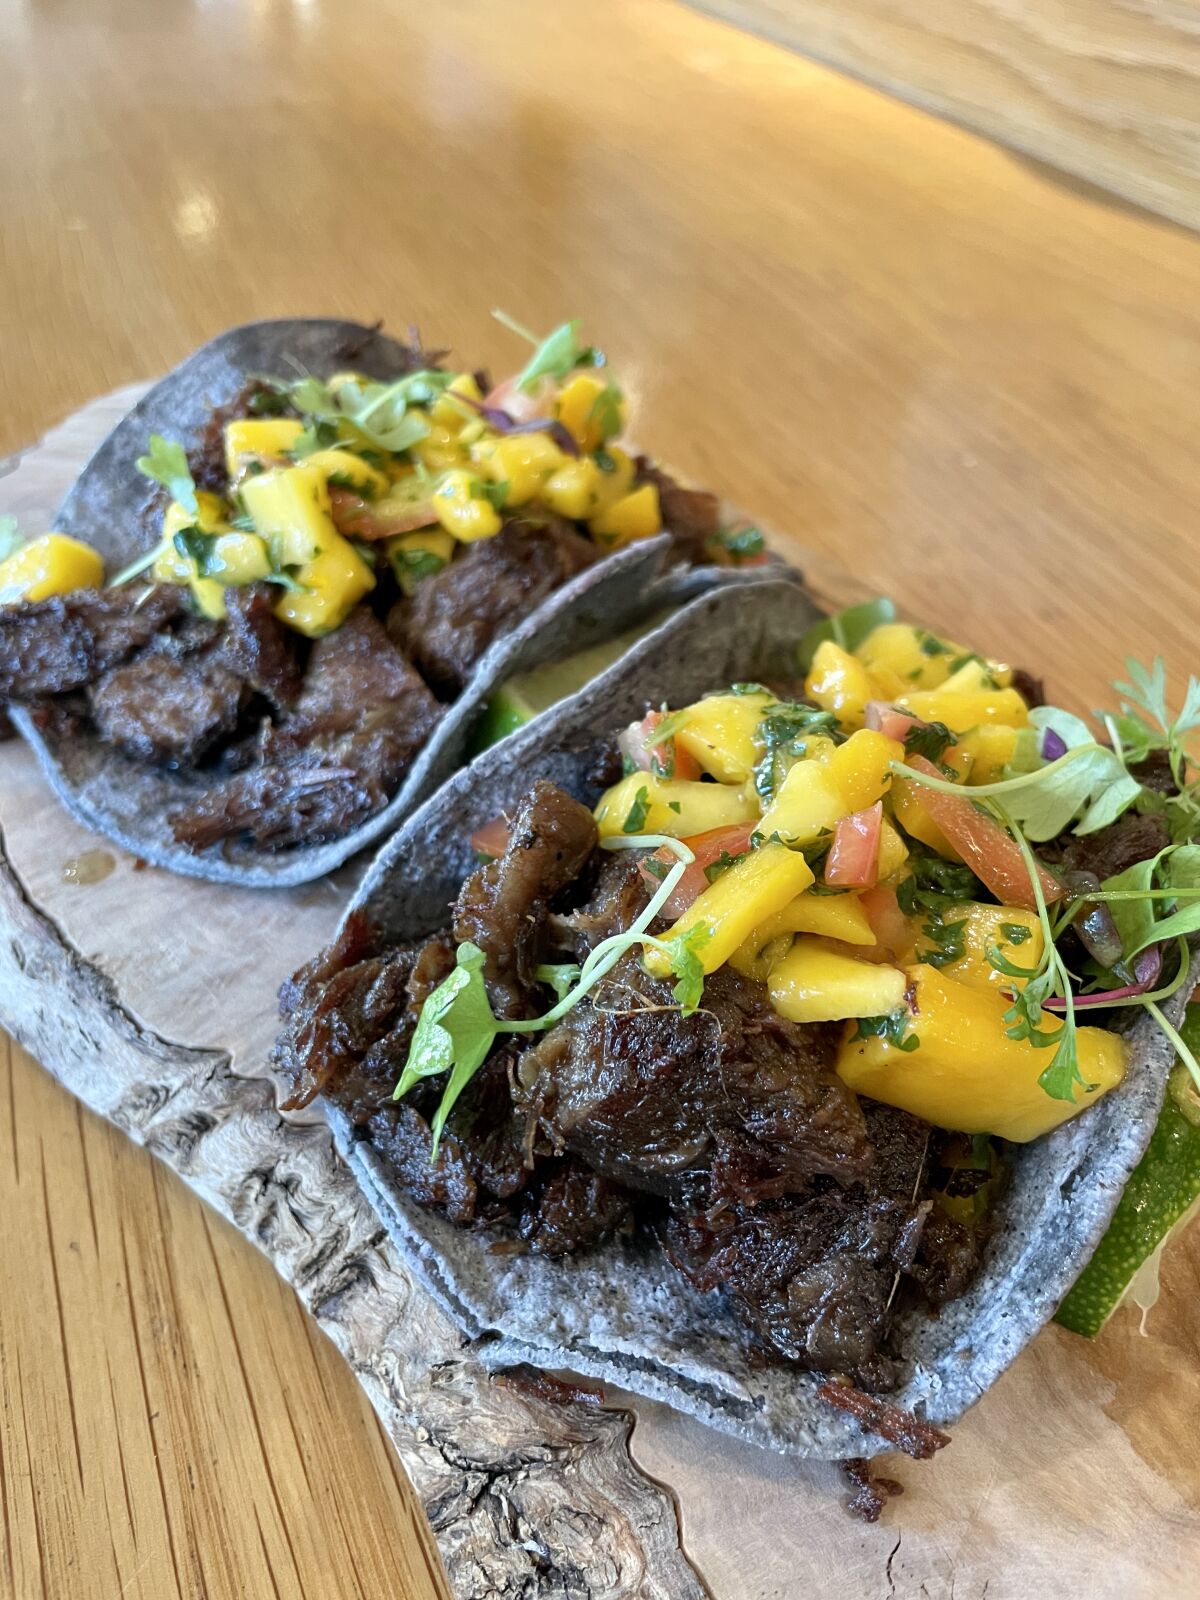 Two beef rendang tacos in blue cornbread, topped with mango sambal sauce.